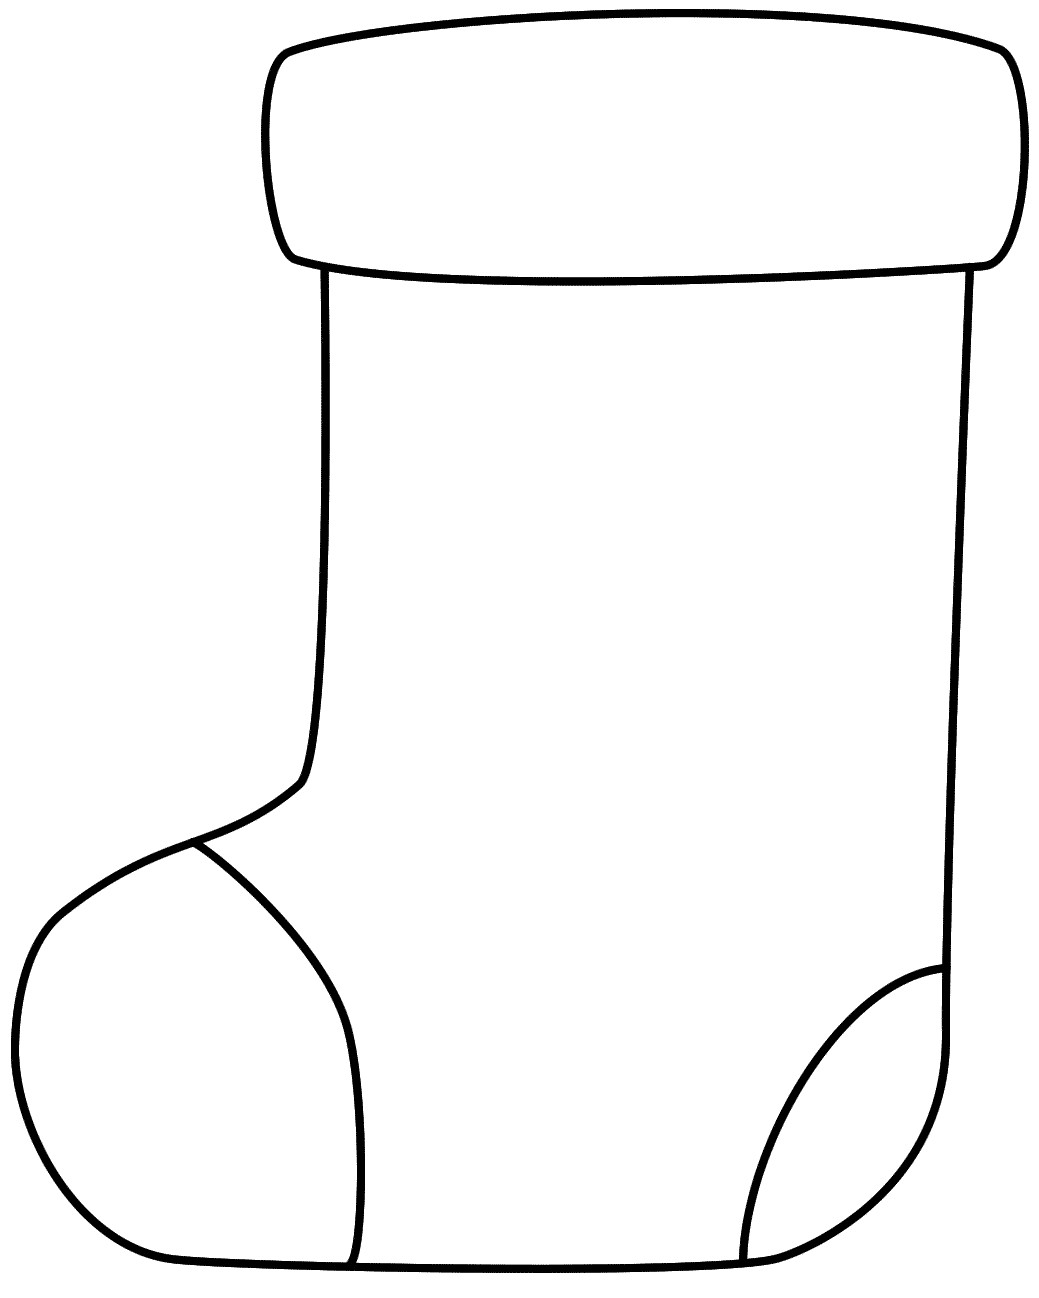 Stocking Printable Coloring Pages
 Christmas Stocking Coloring Pages Kids